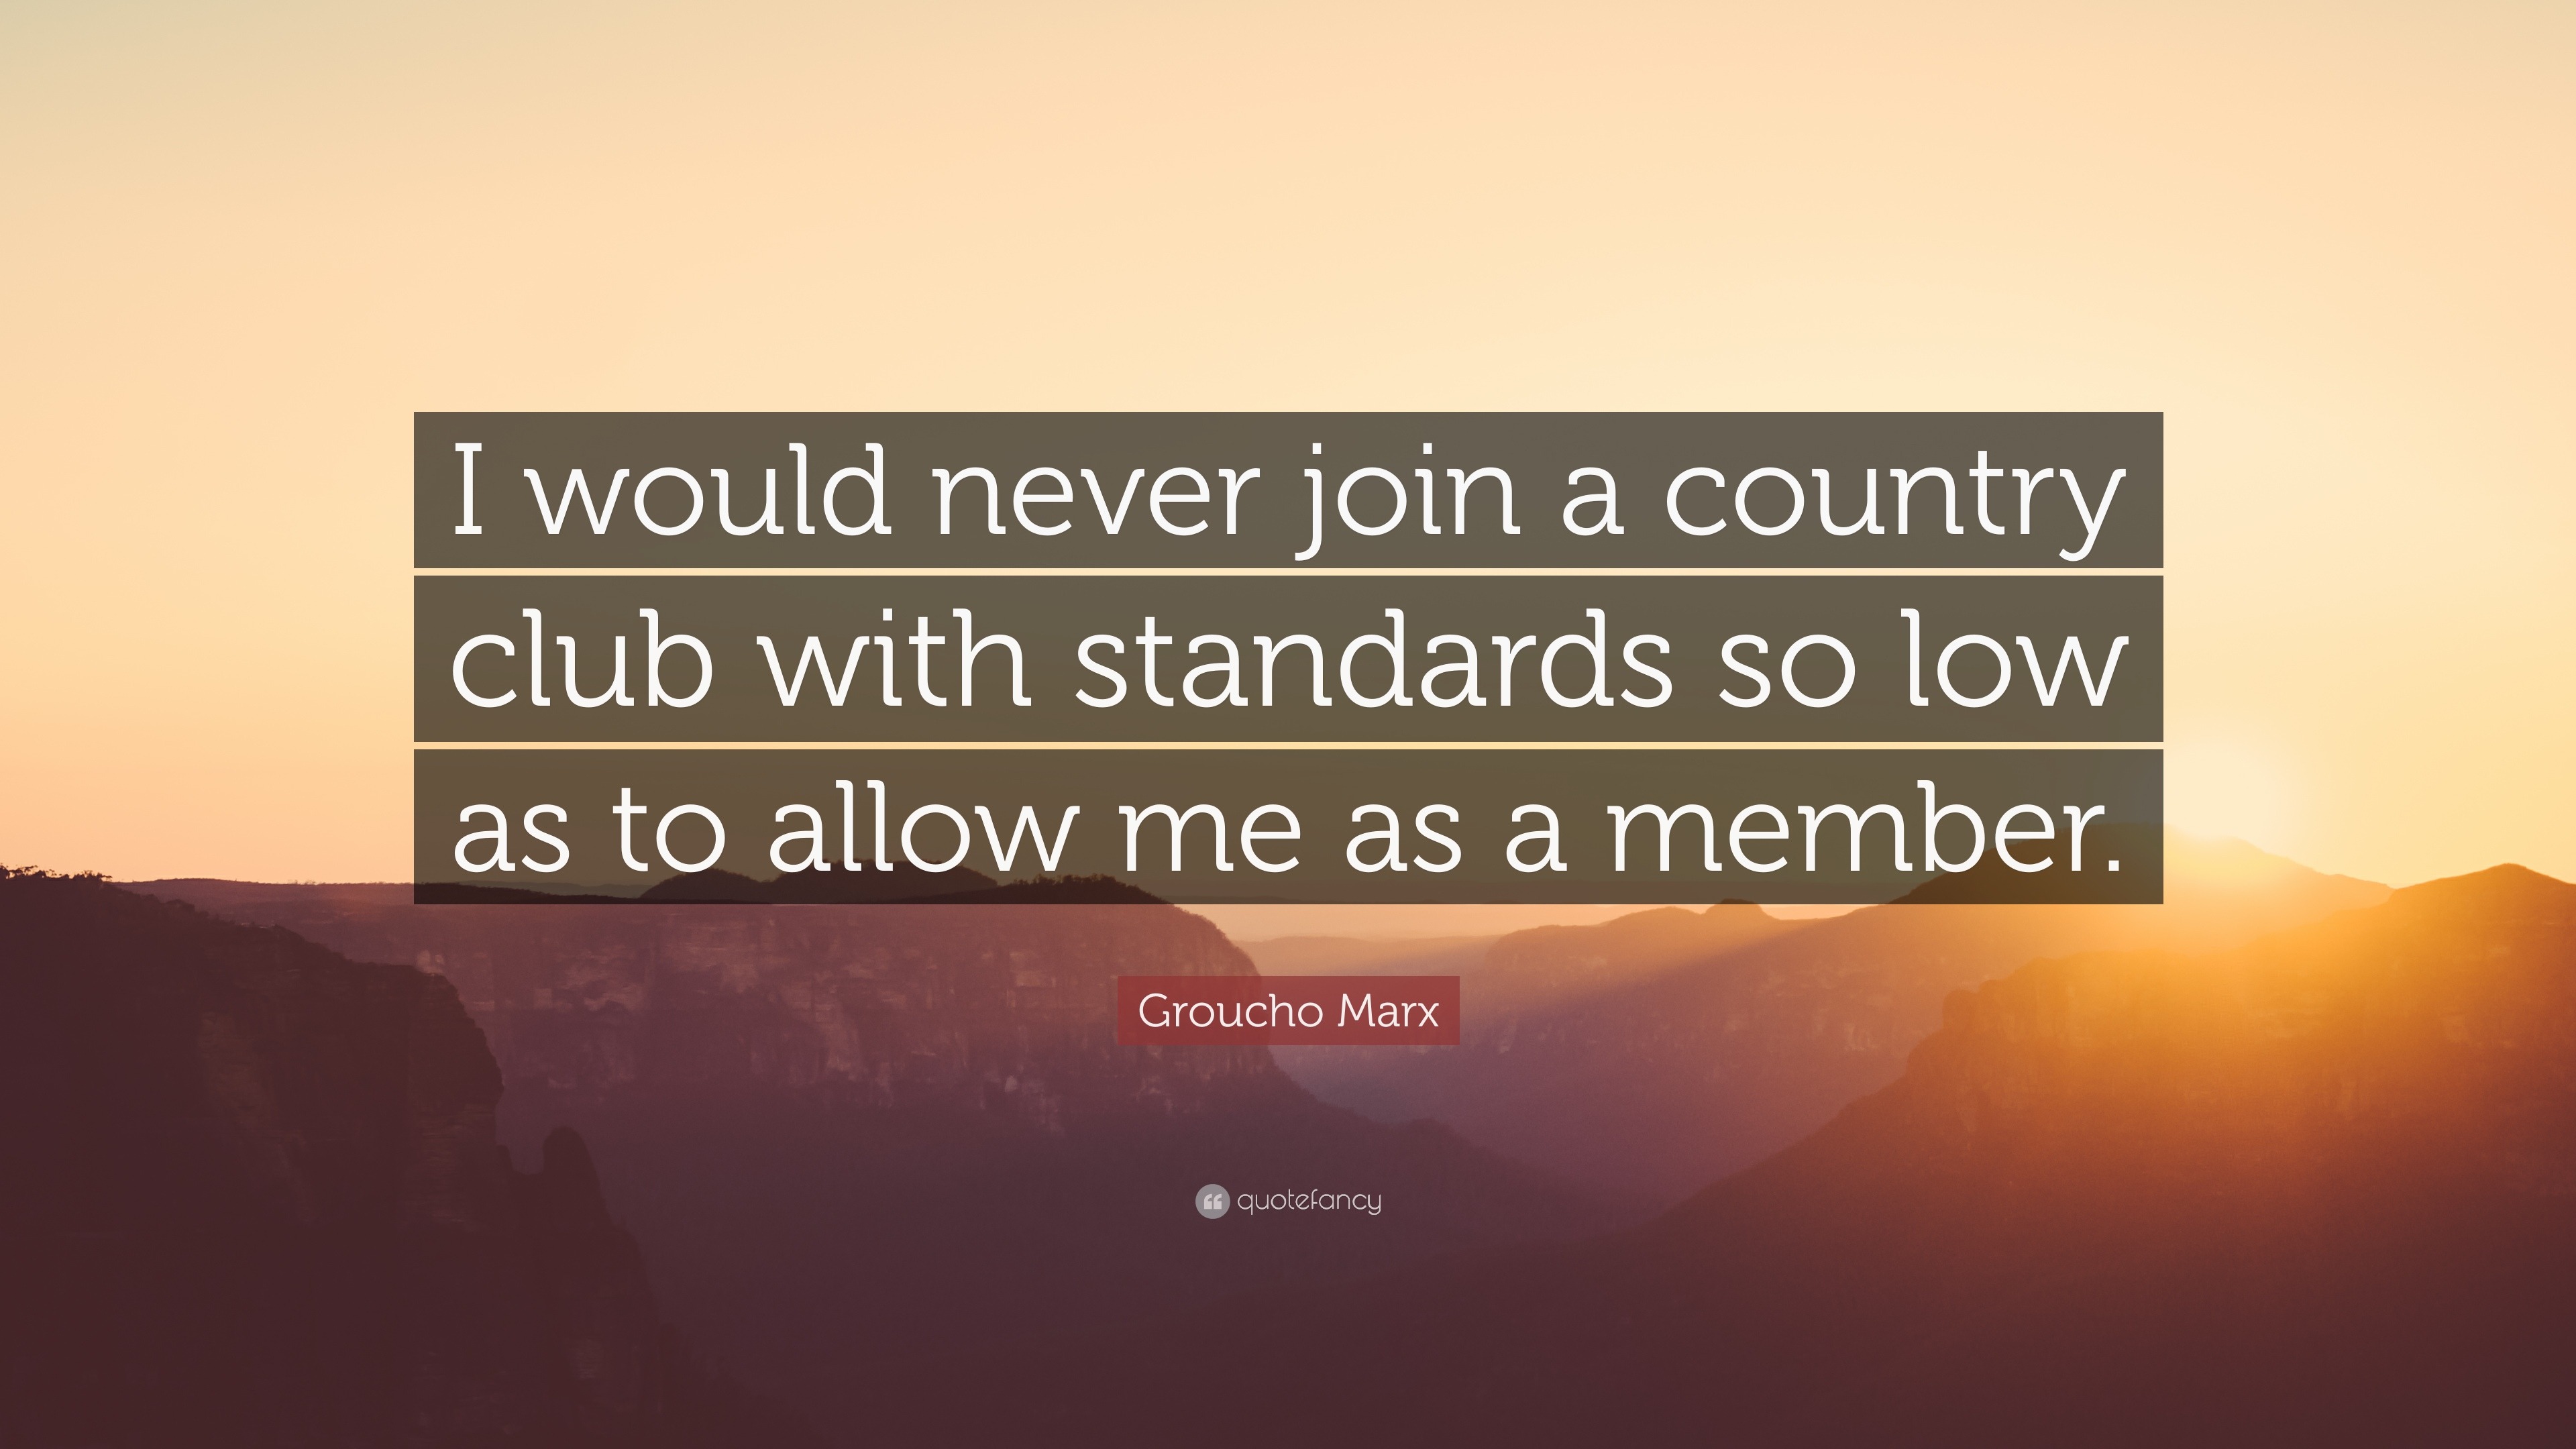 Groucho Marx Quote: “I would never join a country club with standards so  low as to